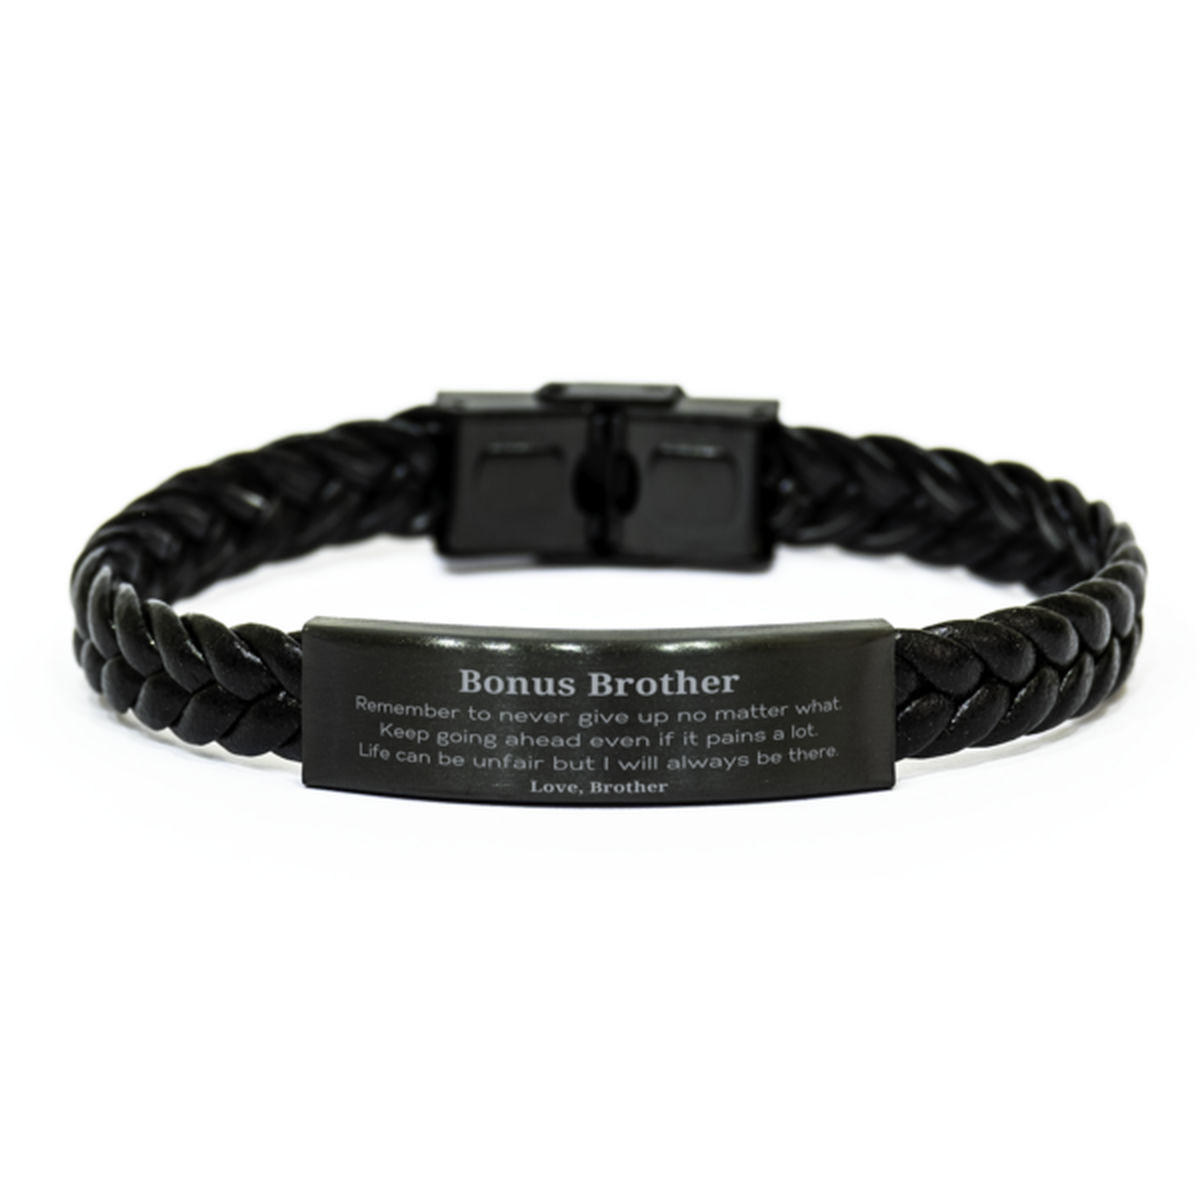 Bonus Brother Motivational Gifts from Brother, Remember to never give up no matter what, Inspirational Birthday Braided Leather Bracelet for Bonus Brother